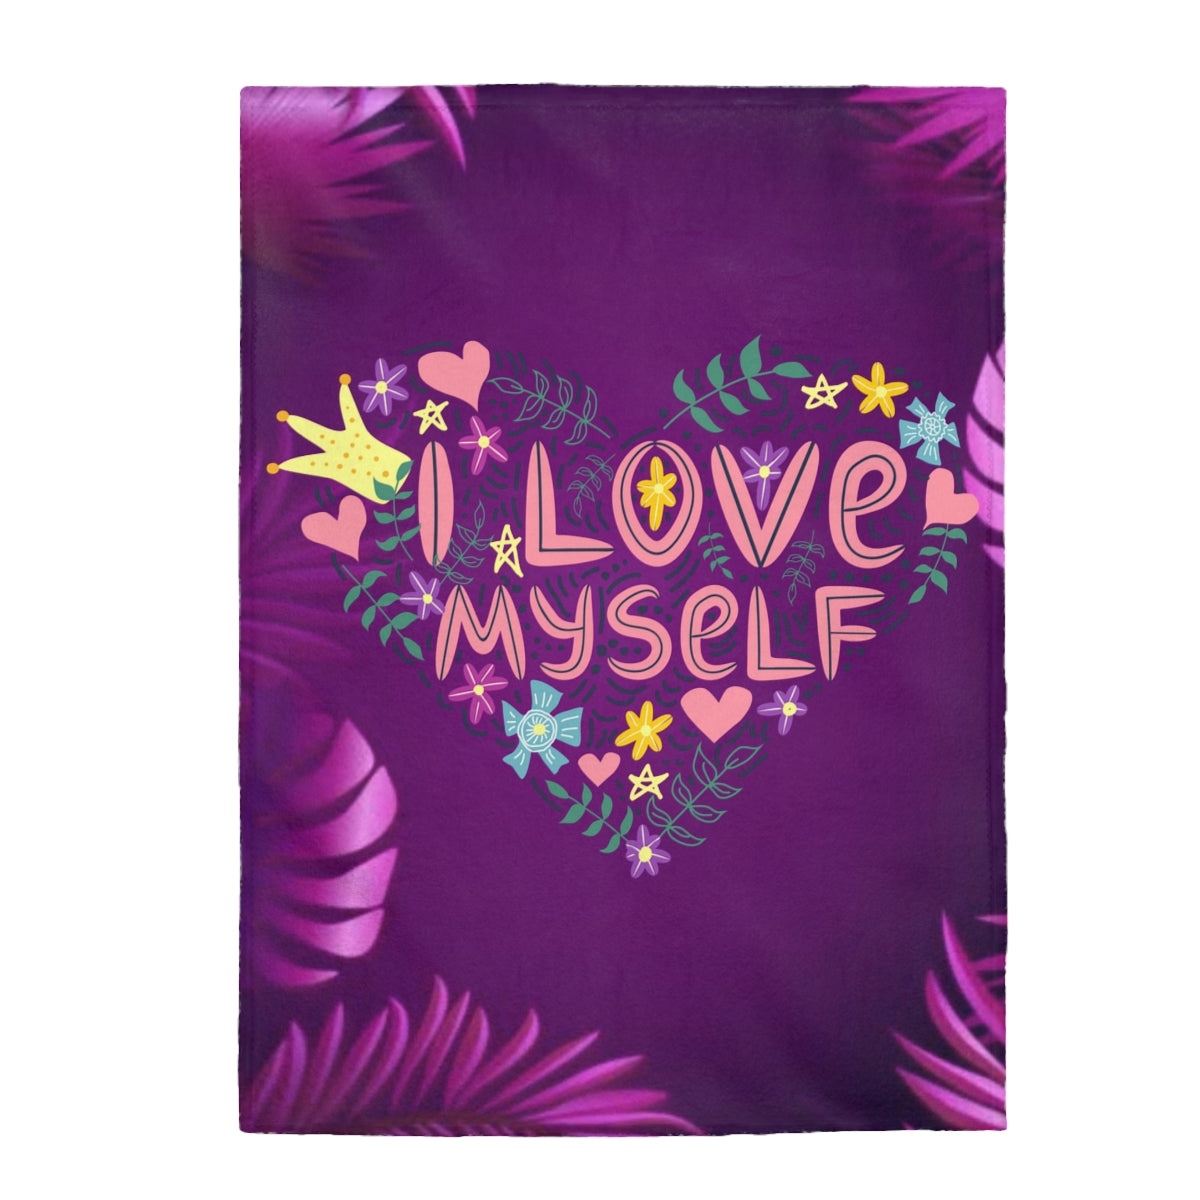 Blankets Personalised, Motivational I Love Myself Floral heart Theme, Purple Throw Blanket, Plush Veveteen Super Soft Cozy Throw Blankets, 3 Sizes